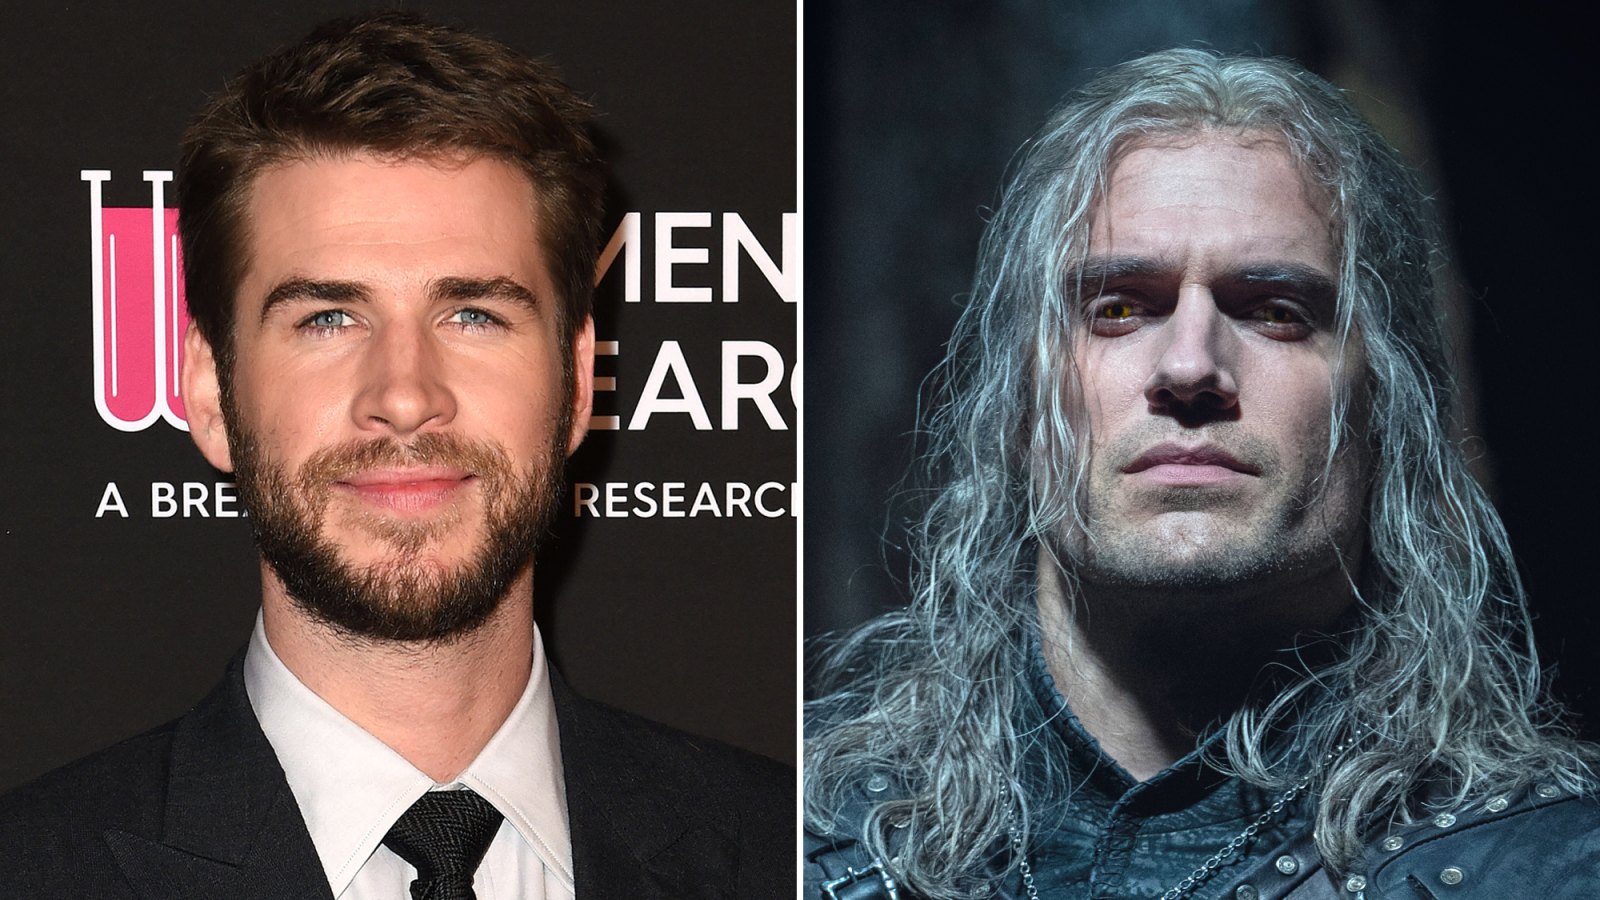 The Witcher Season 4 Confirmed But At The Cost Of Henry Cavill Being  Replaced By Liam Hemsworth, Fans Lament